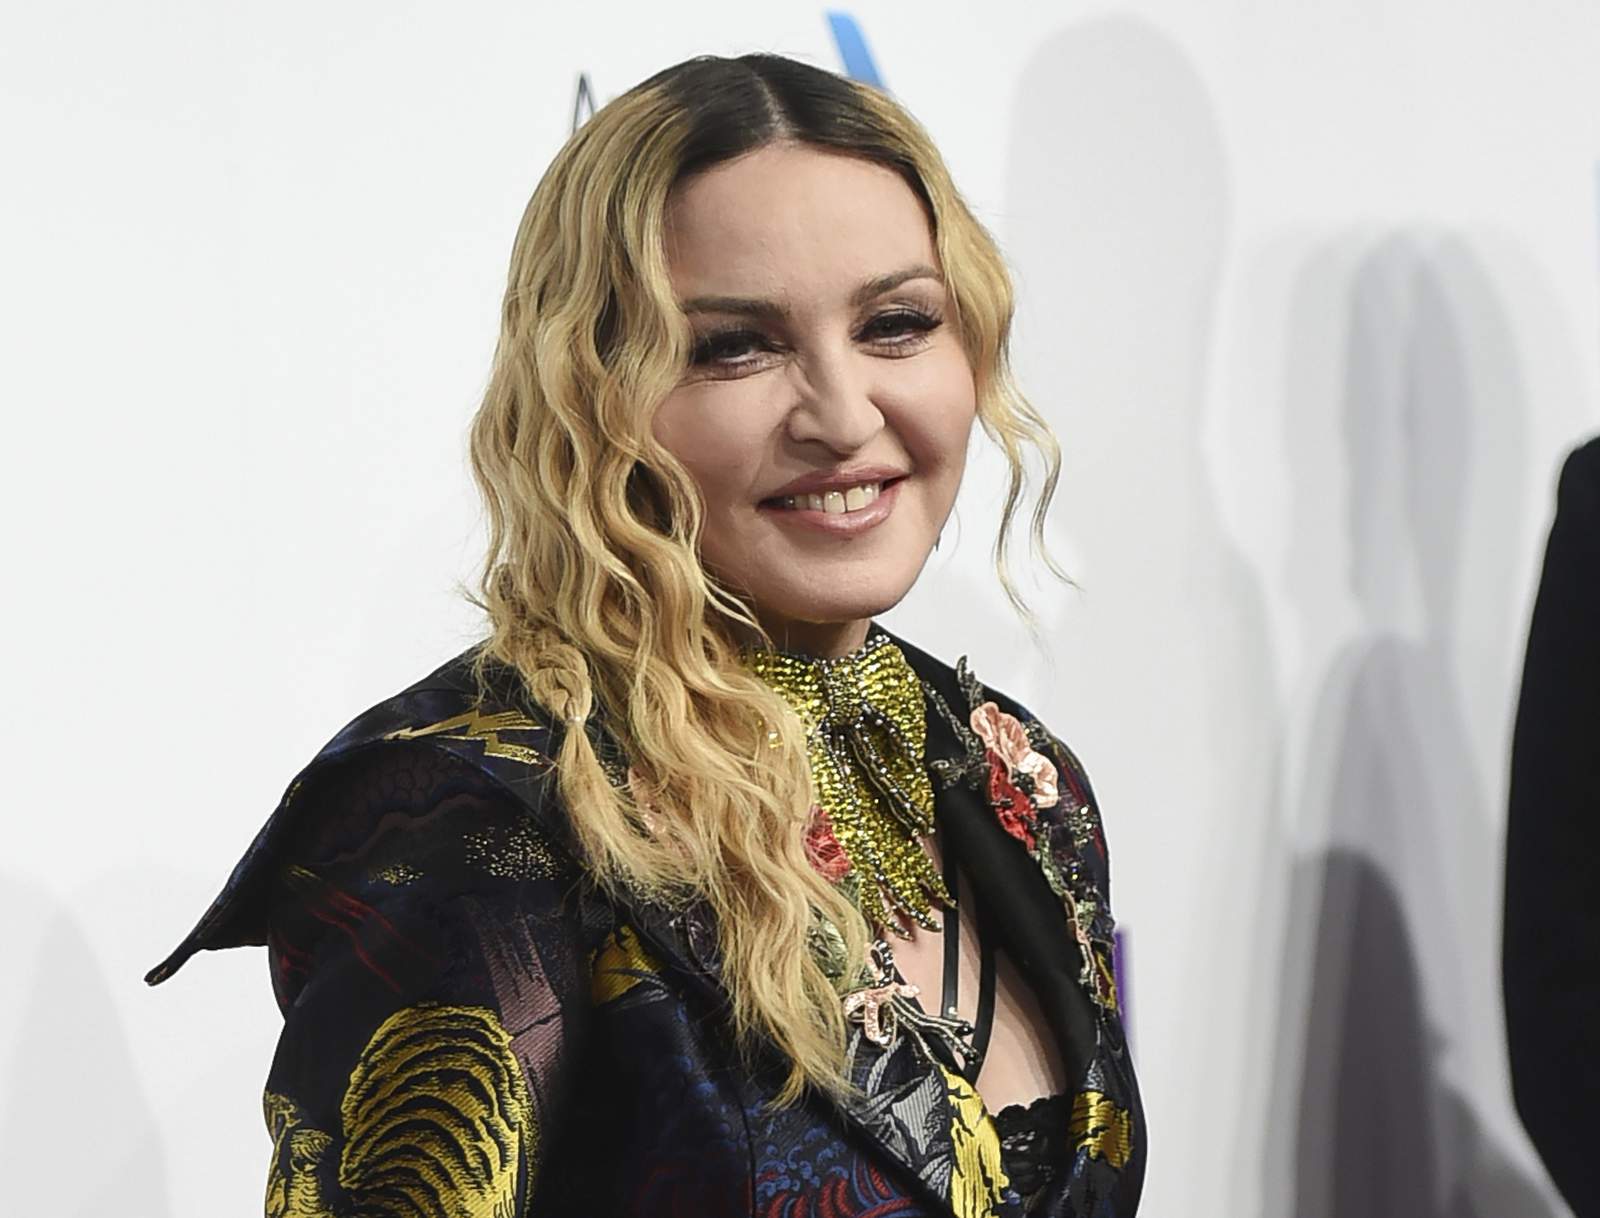 Madonna to direct, co-write biopic about herself